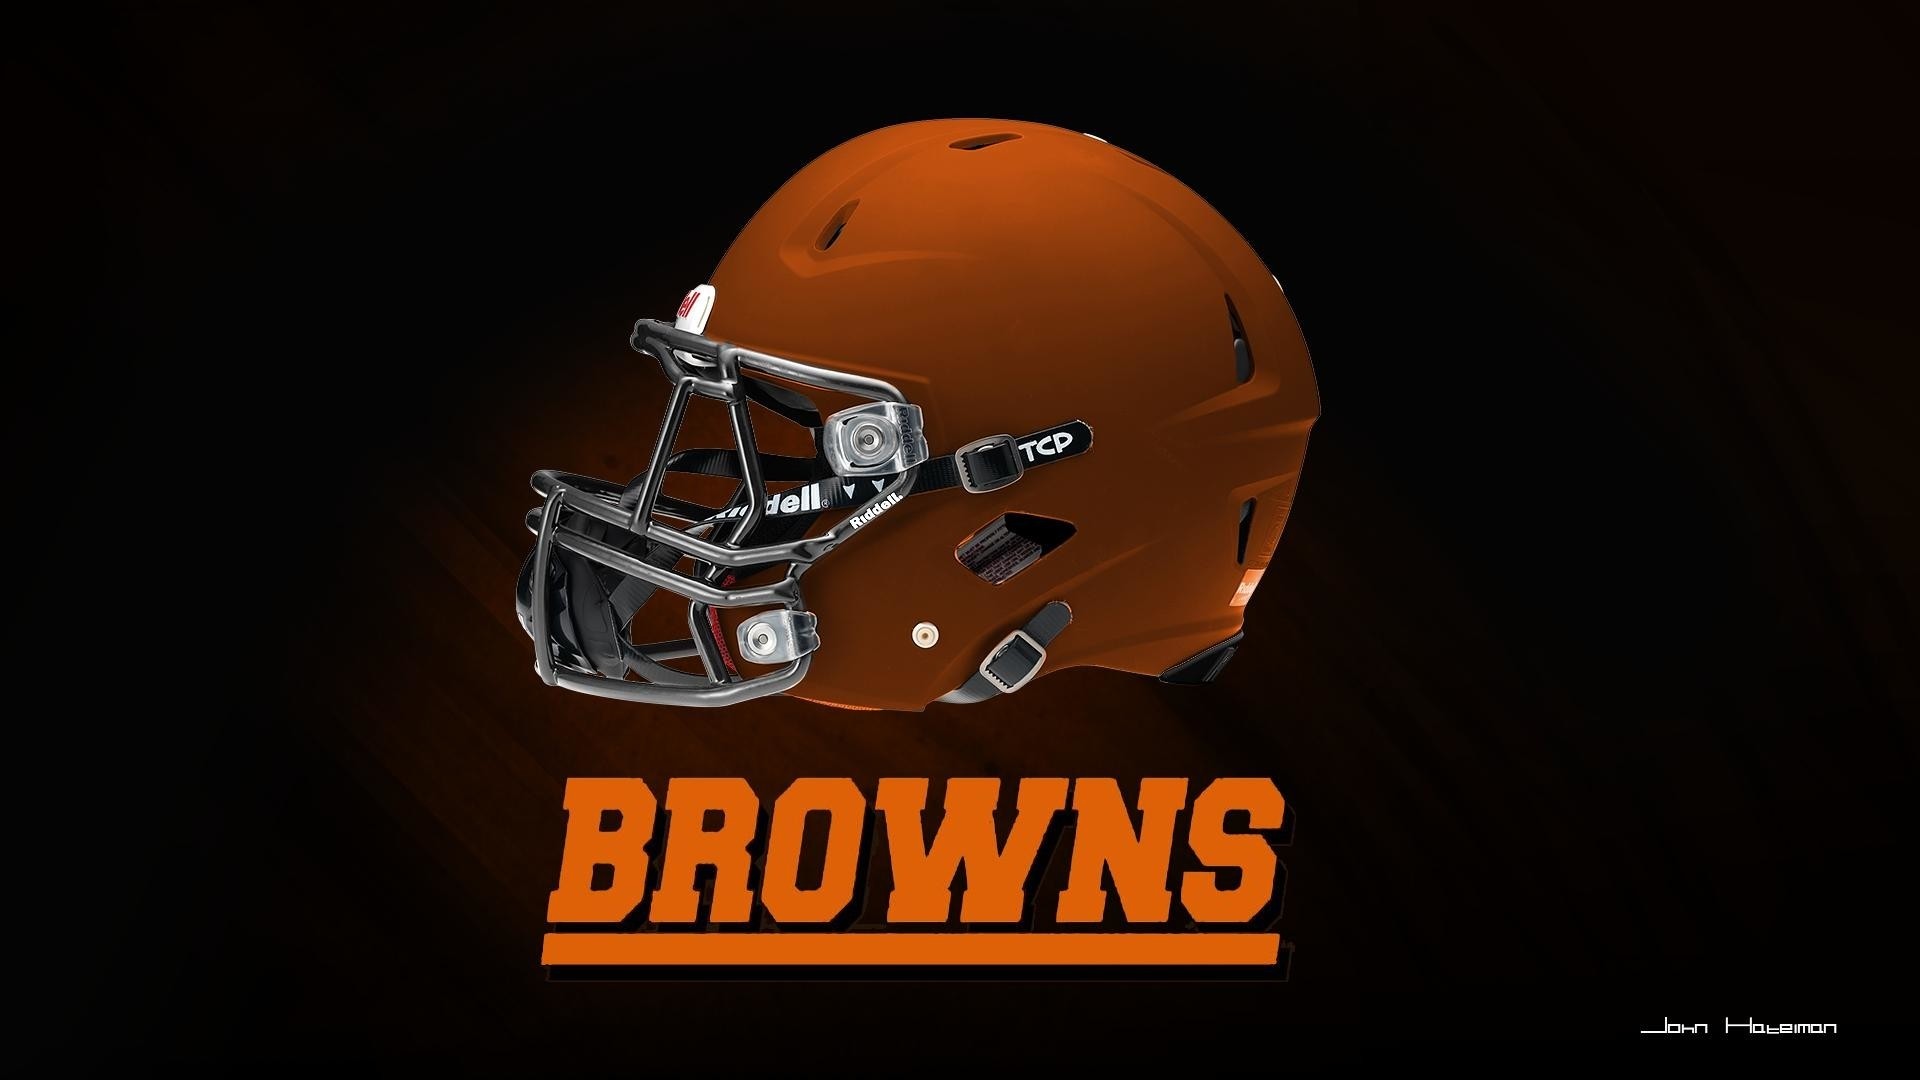 Cleveland Browns Backgrounds